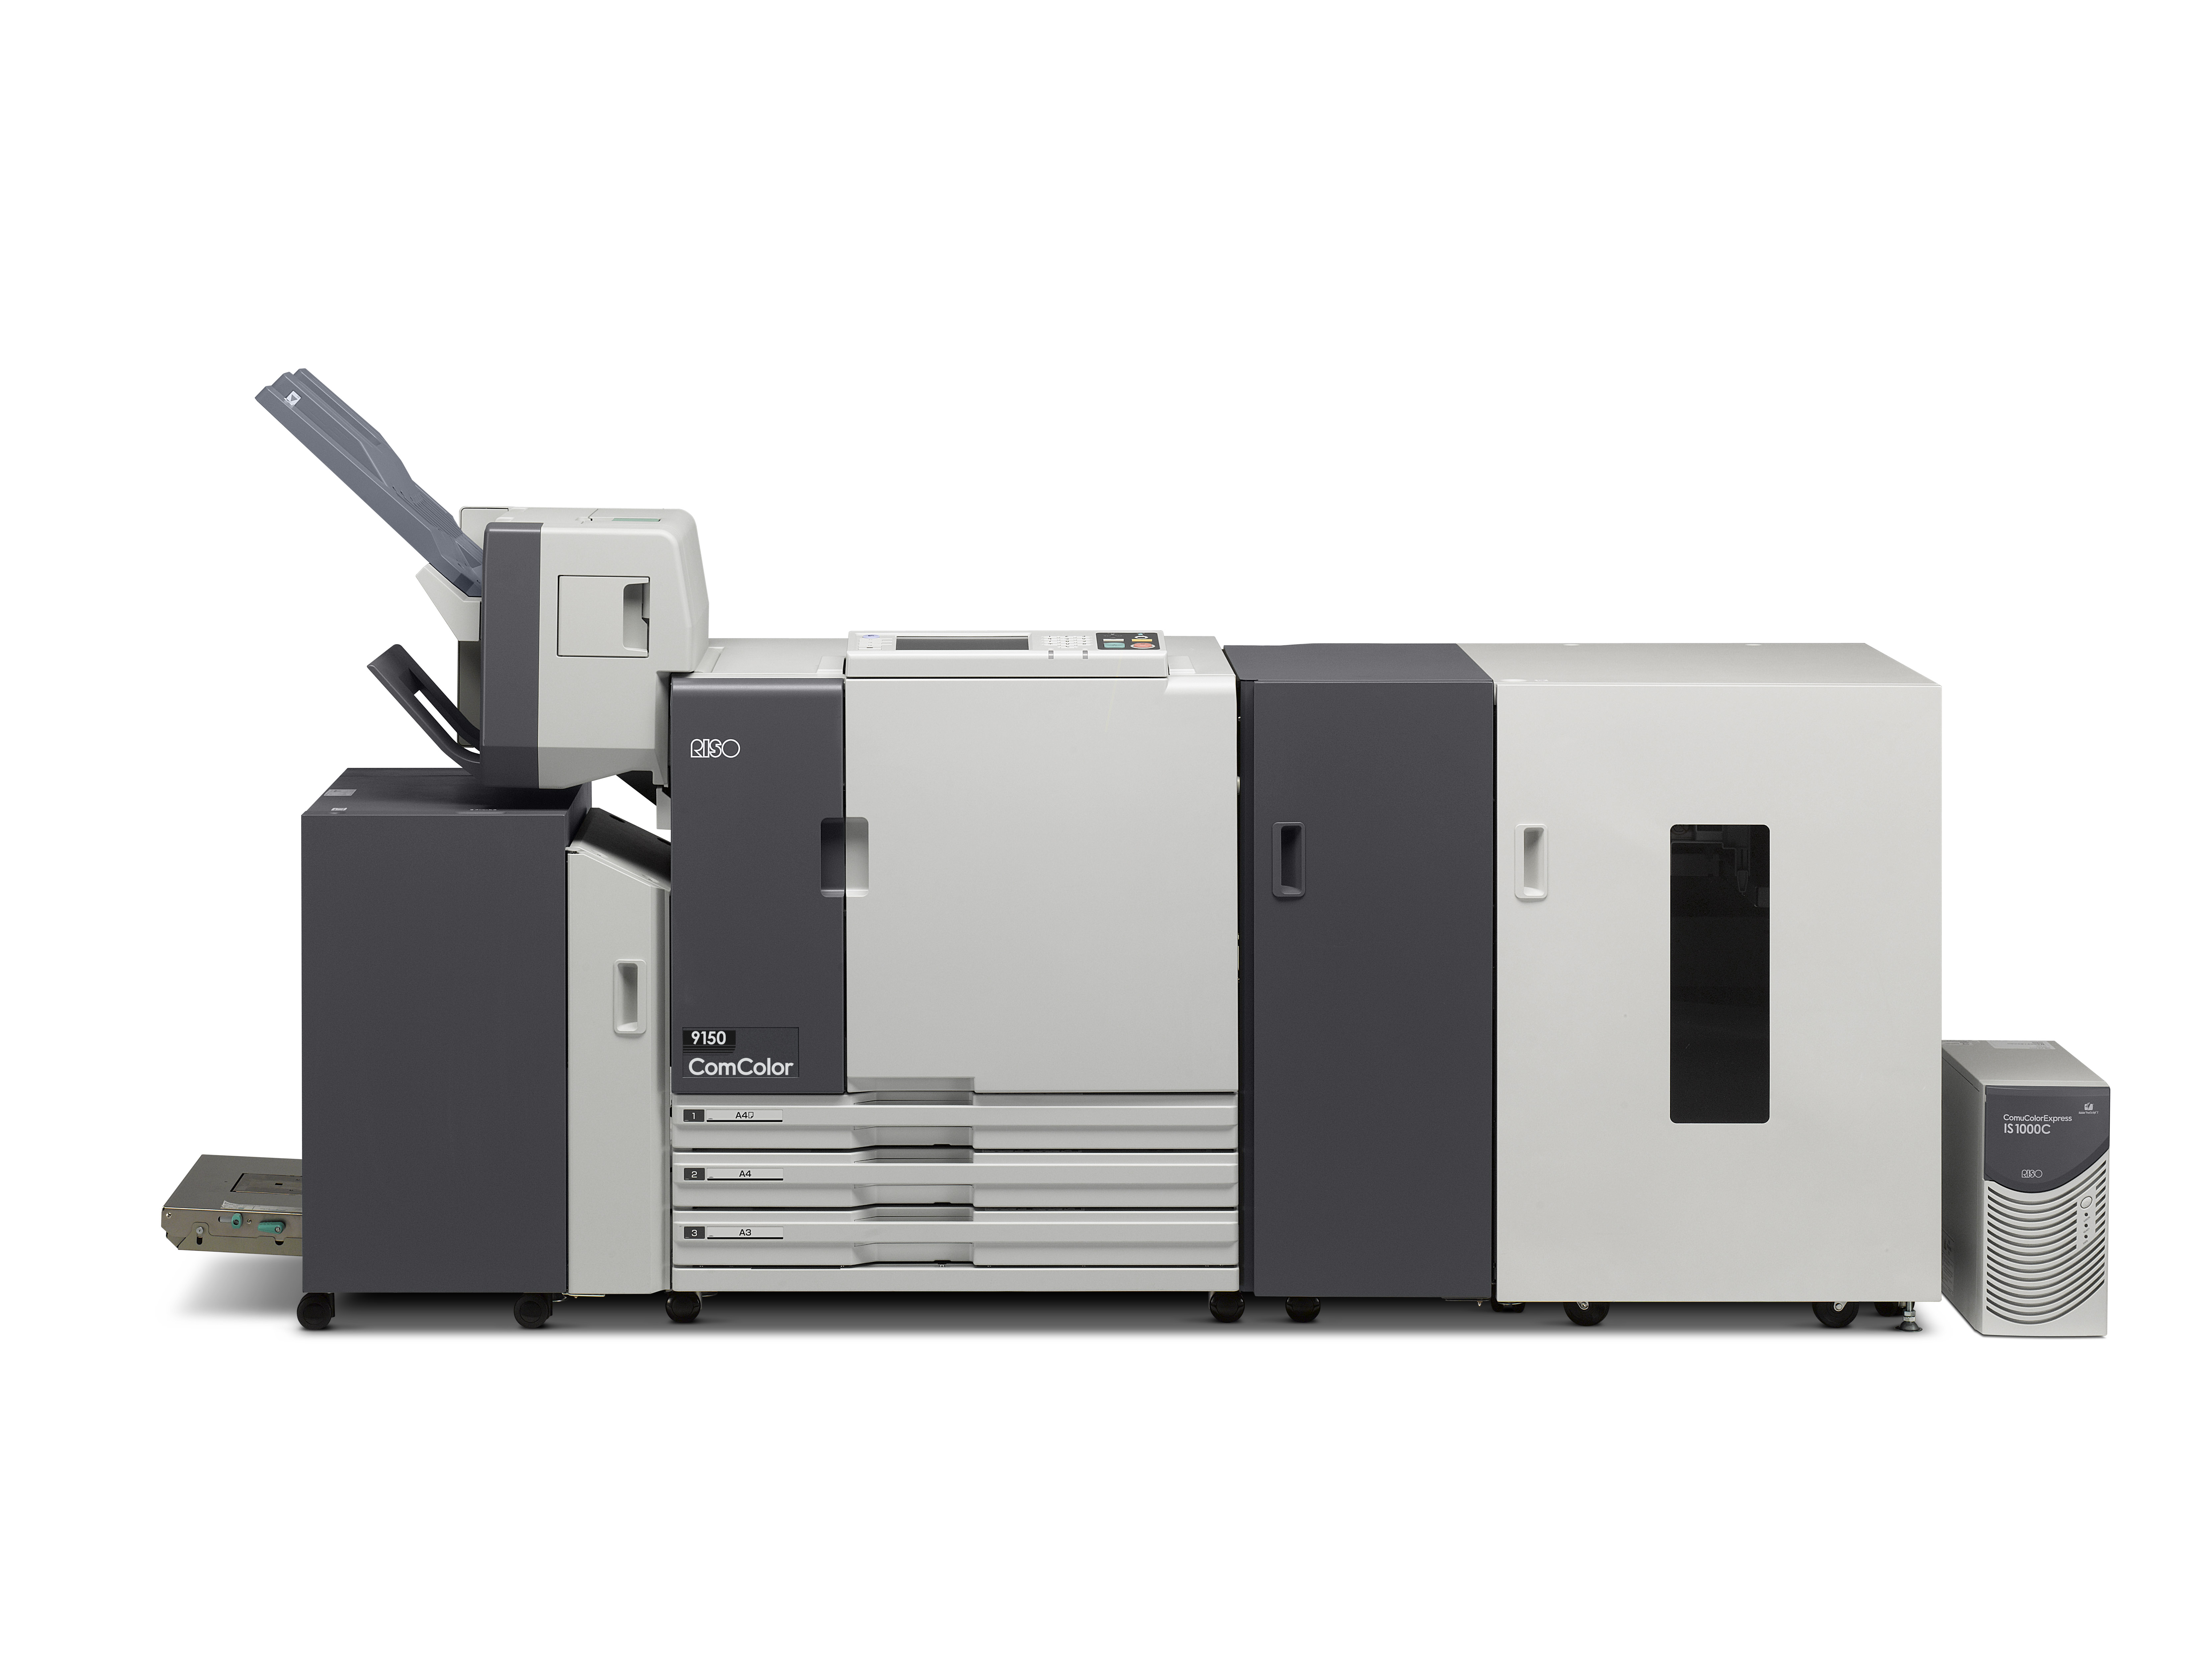 riso comcolor 7050 drivers mac